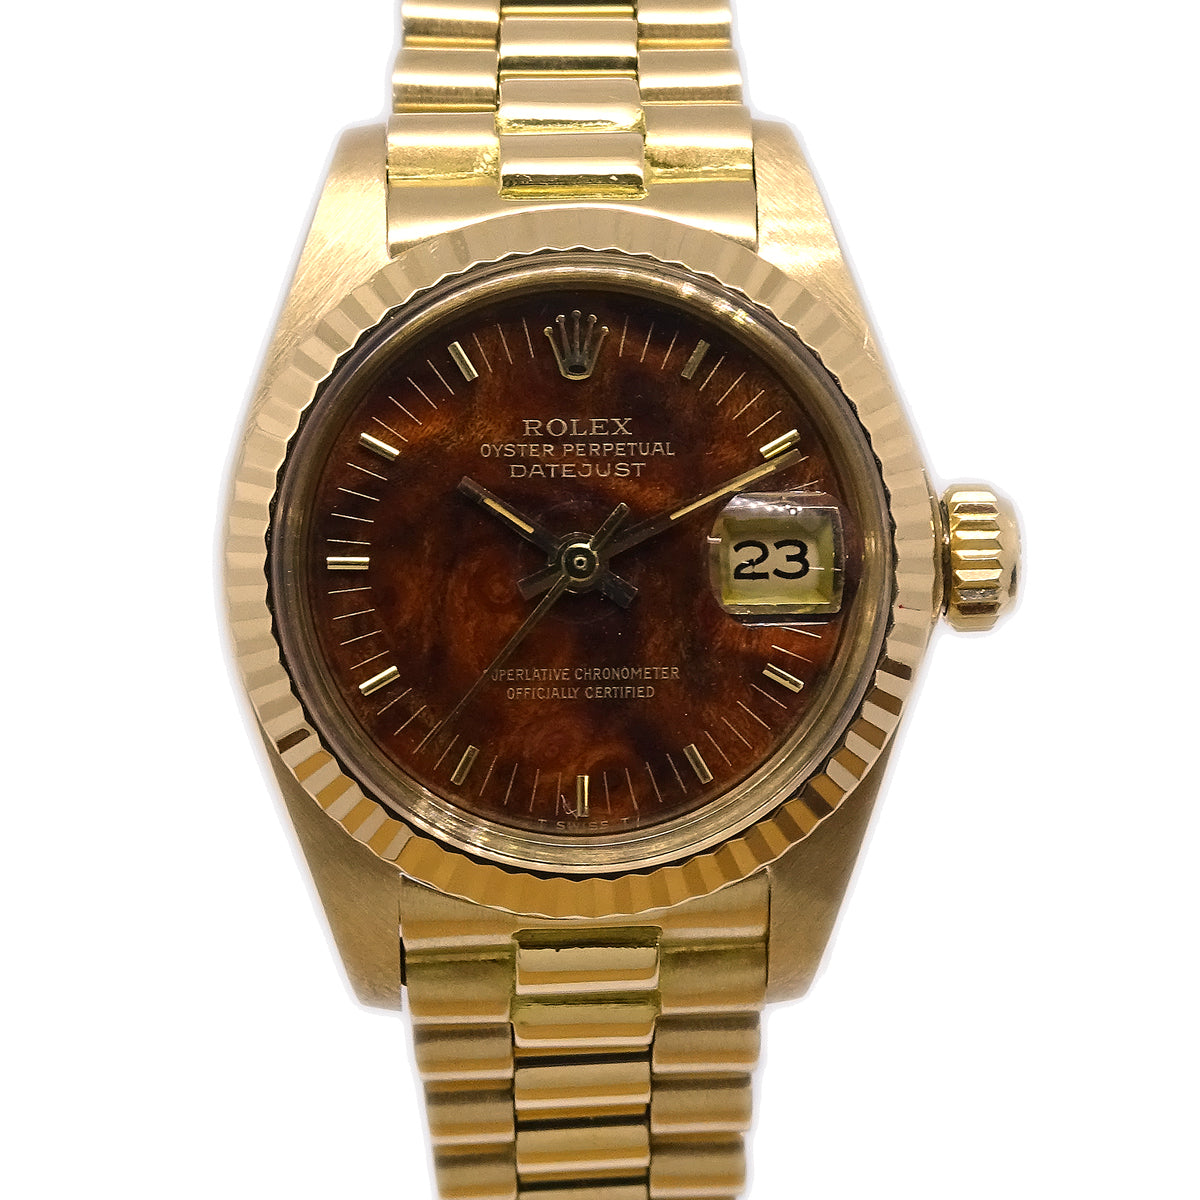 Rolex 1981-1982 Oyster Perpetual Datejust 26mm